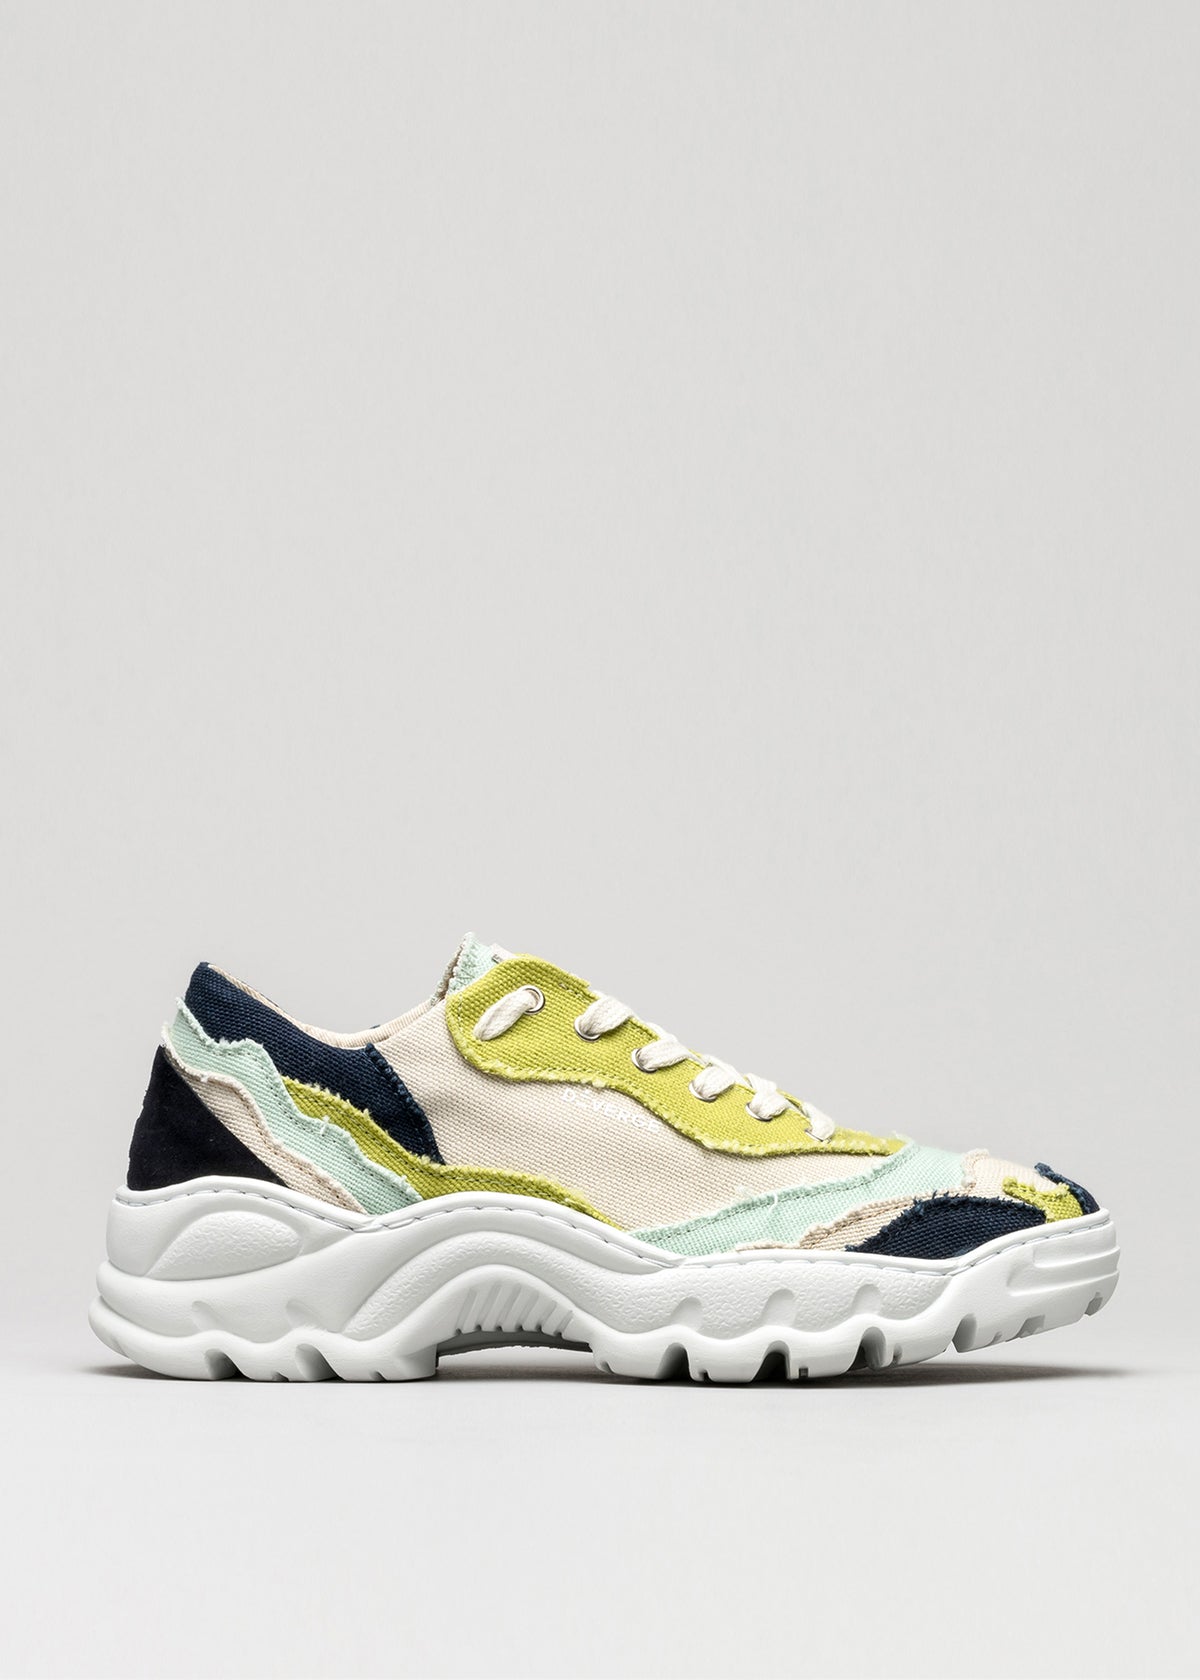 A multicolored low top sneaker with V2 Color Mix Sage Green patches on a light gray background.